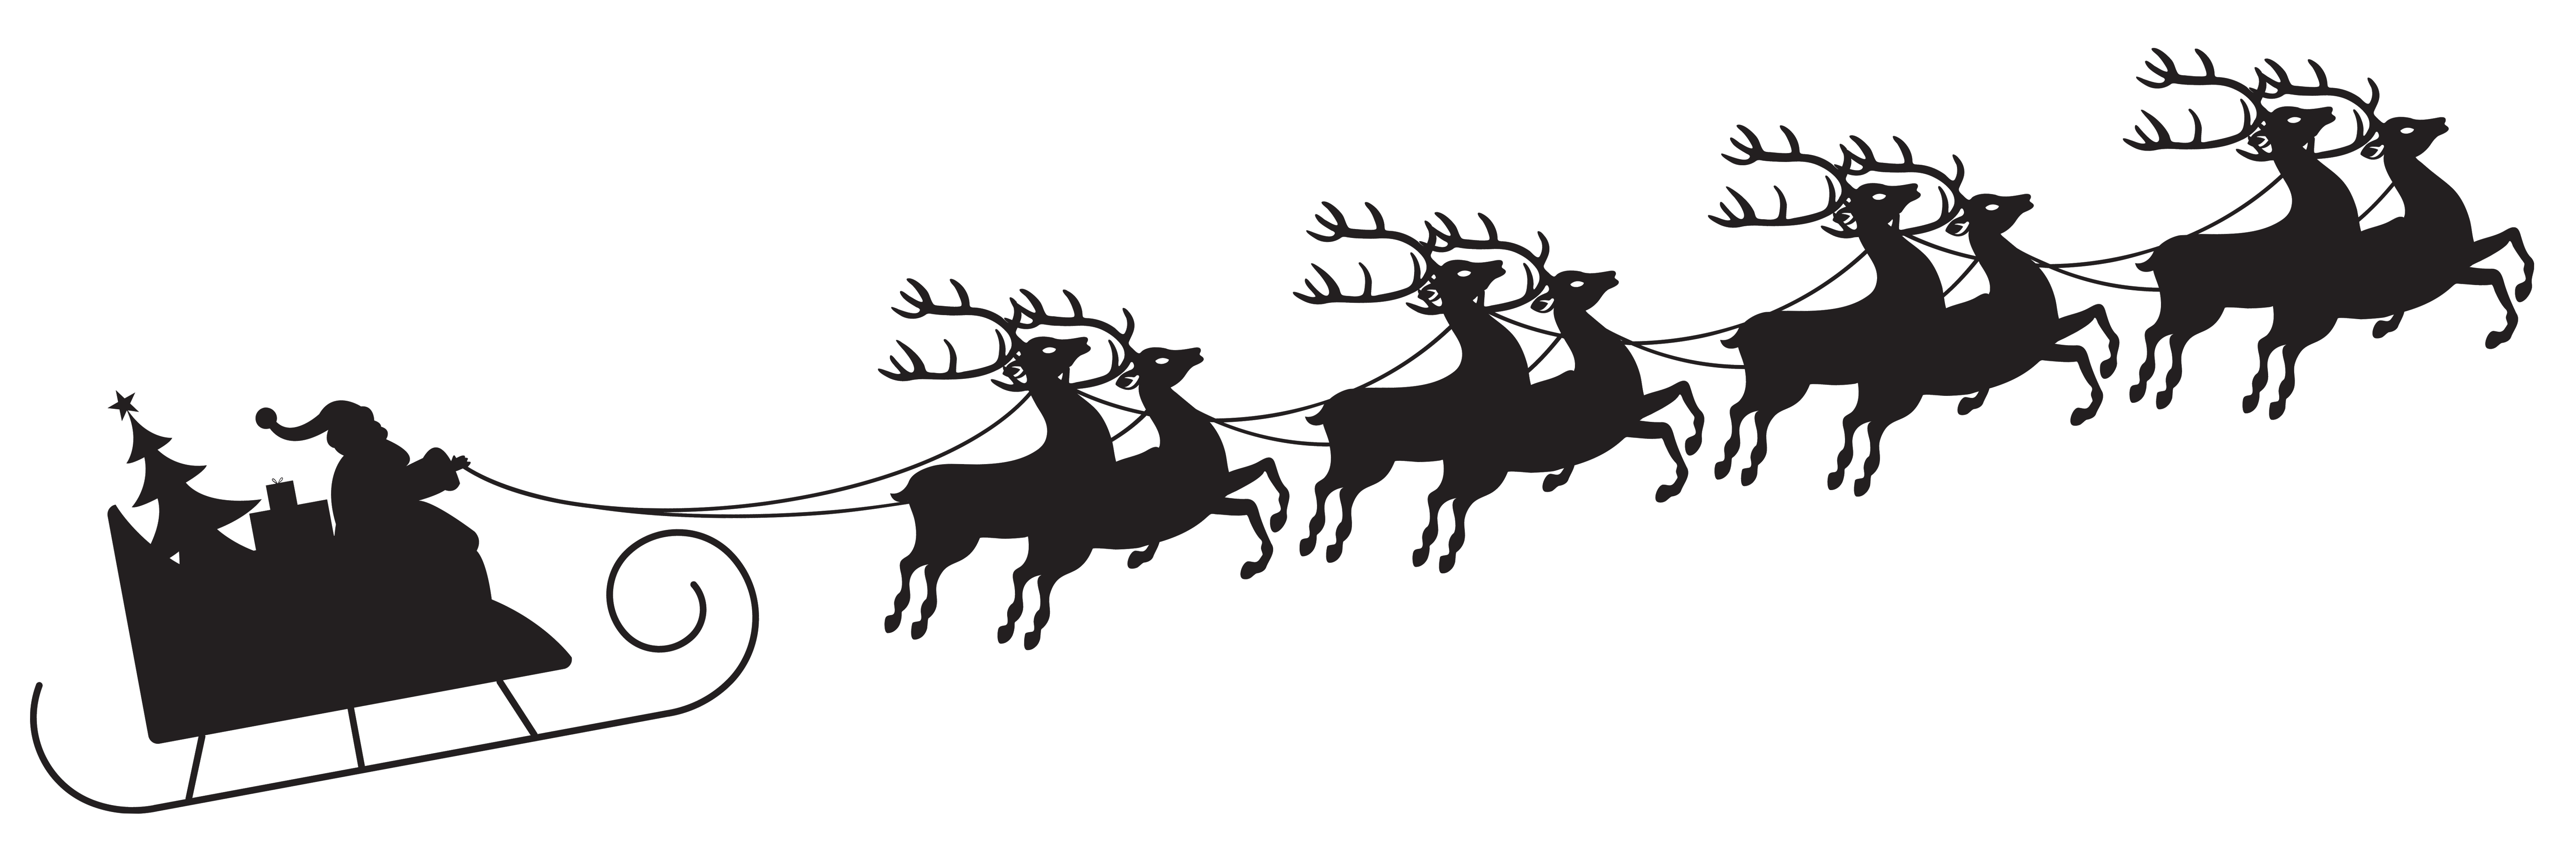 Clipart reindeer baby boy christmas. Silhouette of horse drawn